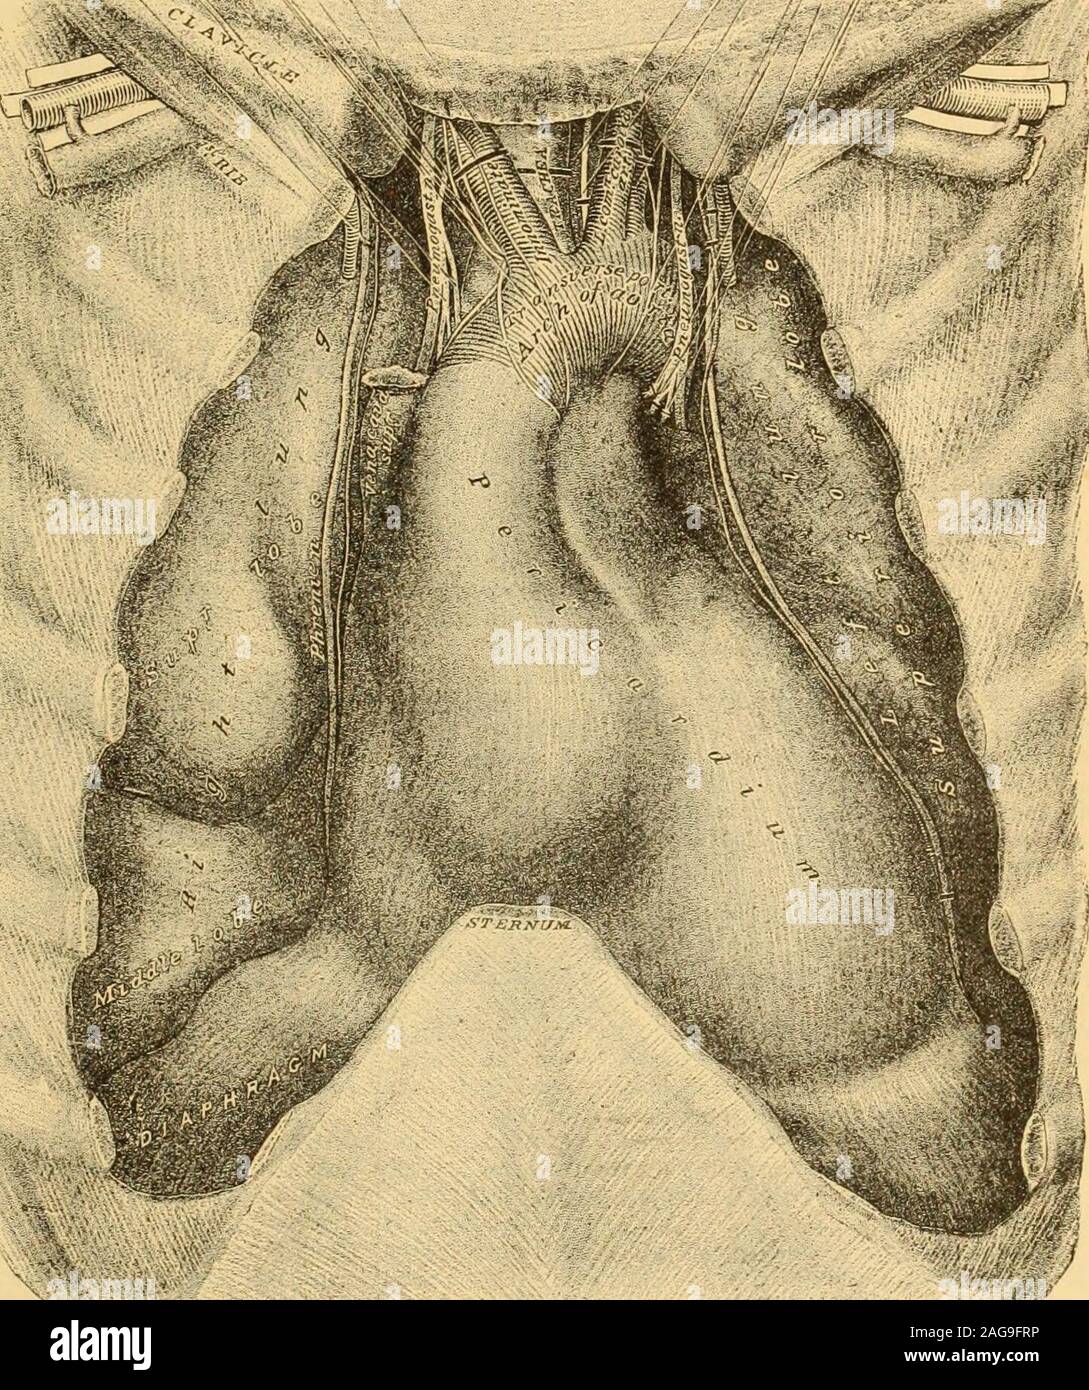 . A Reference handbook of the medical sciences : embracing the entire range of scientific and practical medicine and allied science. e Pericardium and the Arch vein crosses the middleline behind the upper part of the manubrium, being separated from the bone iby the lower ends of the sterno-hyoid and sterno-thyroidmuscles, and by the thymus gland or its remains. The jinternal mammary artery lies at first behind the cartilages ;of the first rib, whence it descends vertically behind the costal cartilages about half an inch from the border ofthe sternum, as low down as the interval between the six Stock Photo